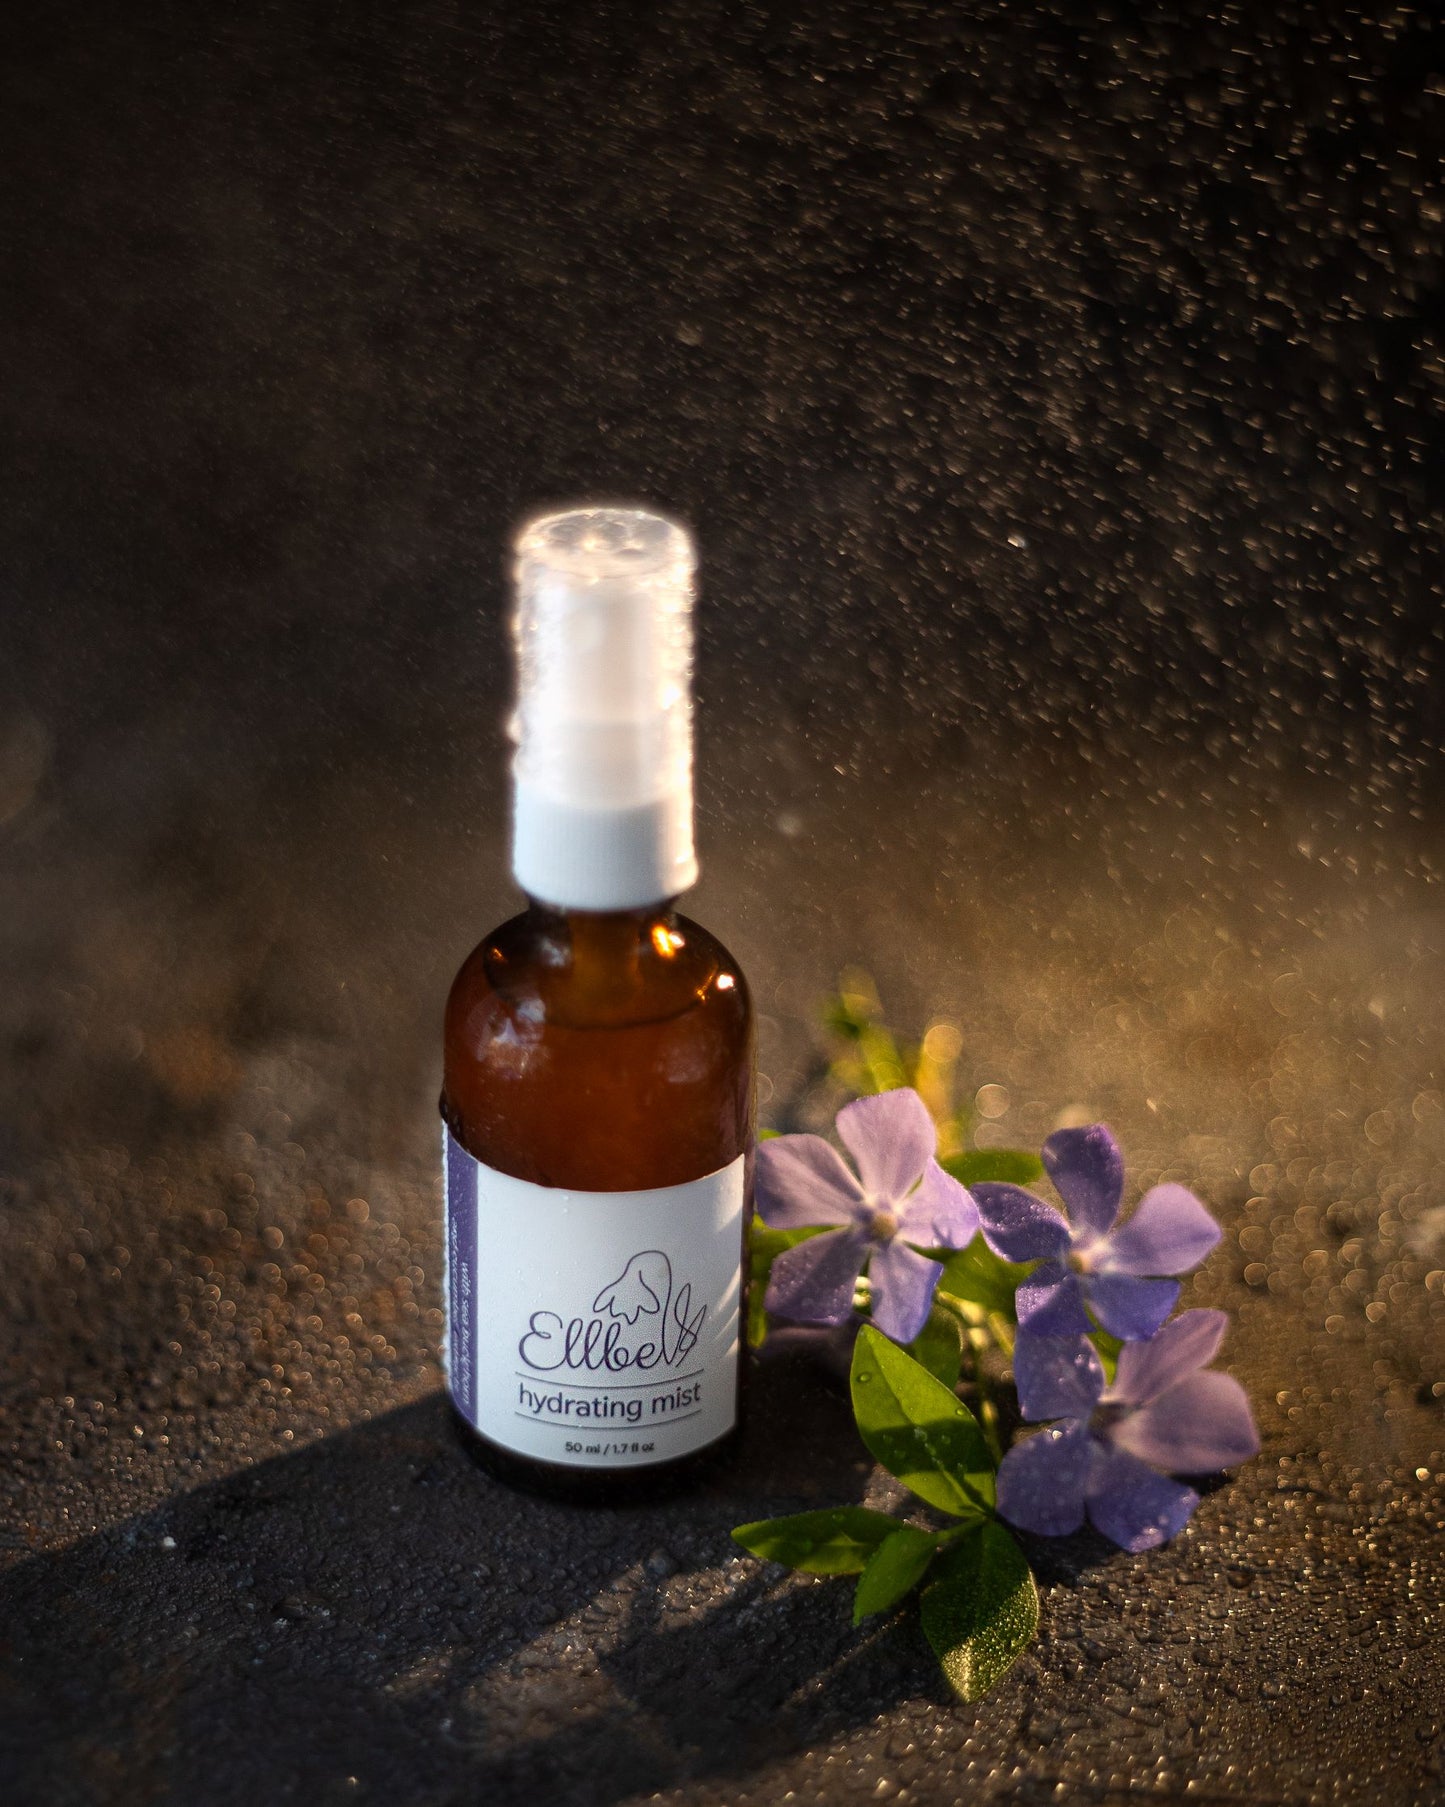 Hydrating Mist/Tonic/Hyaluronic Acid/Rose water